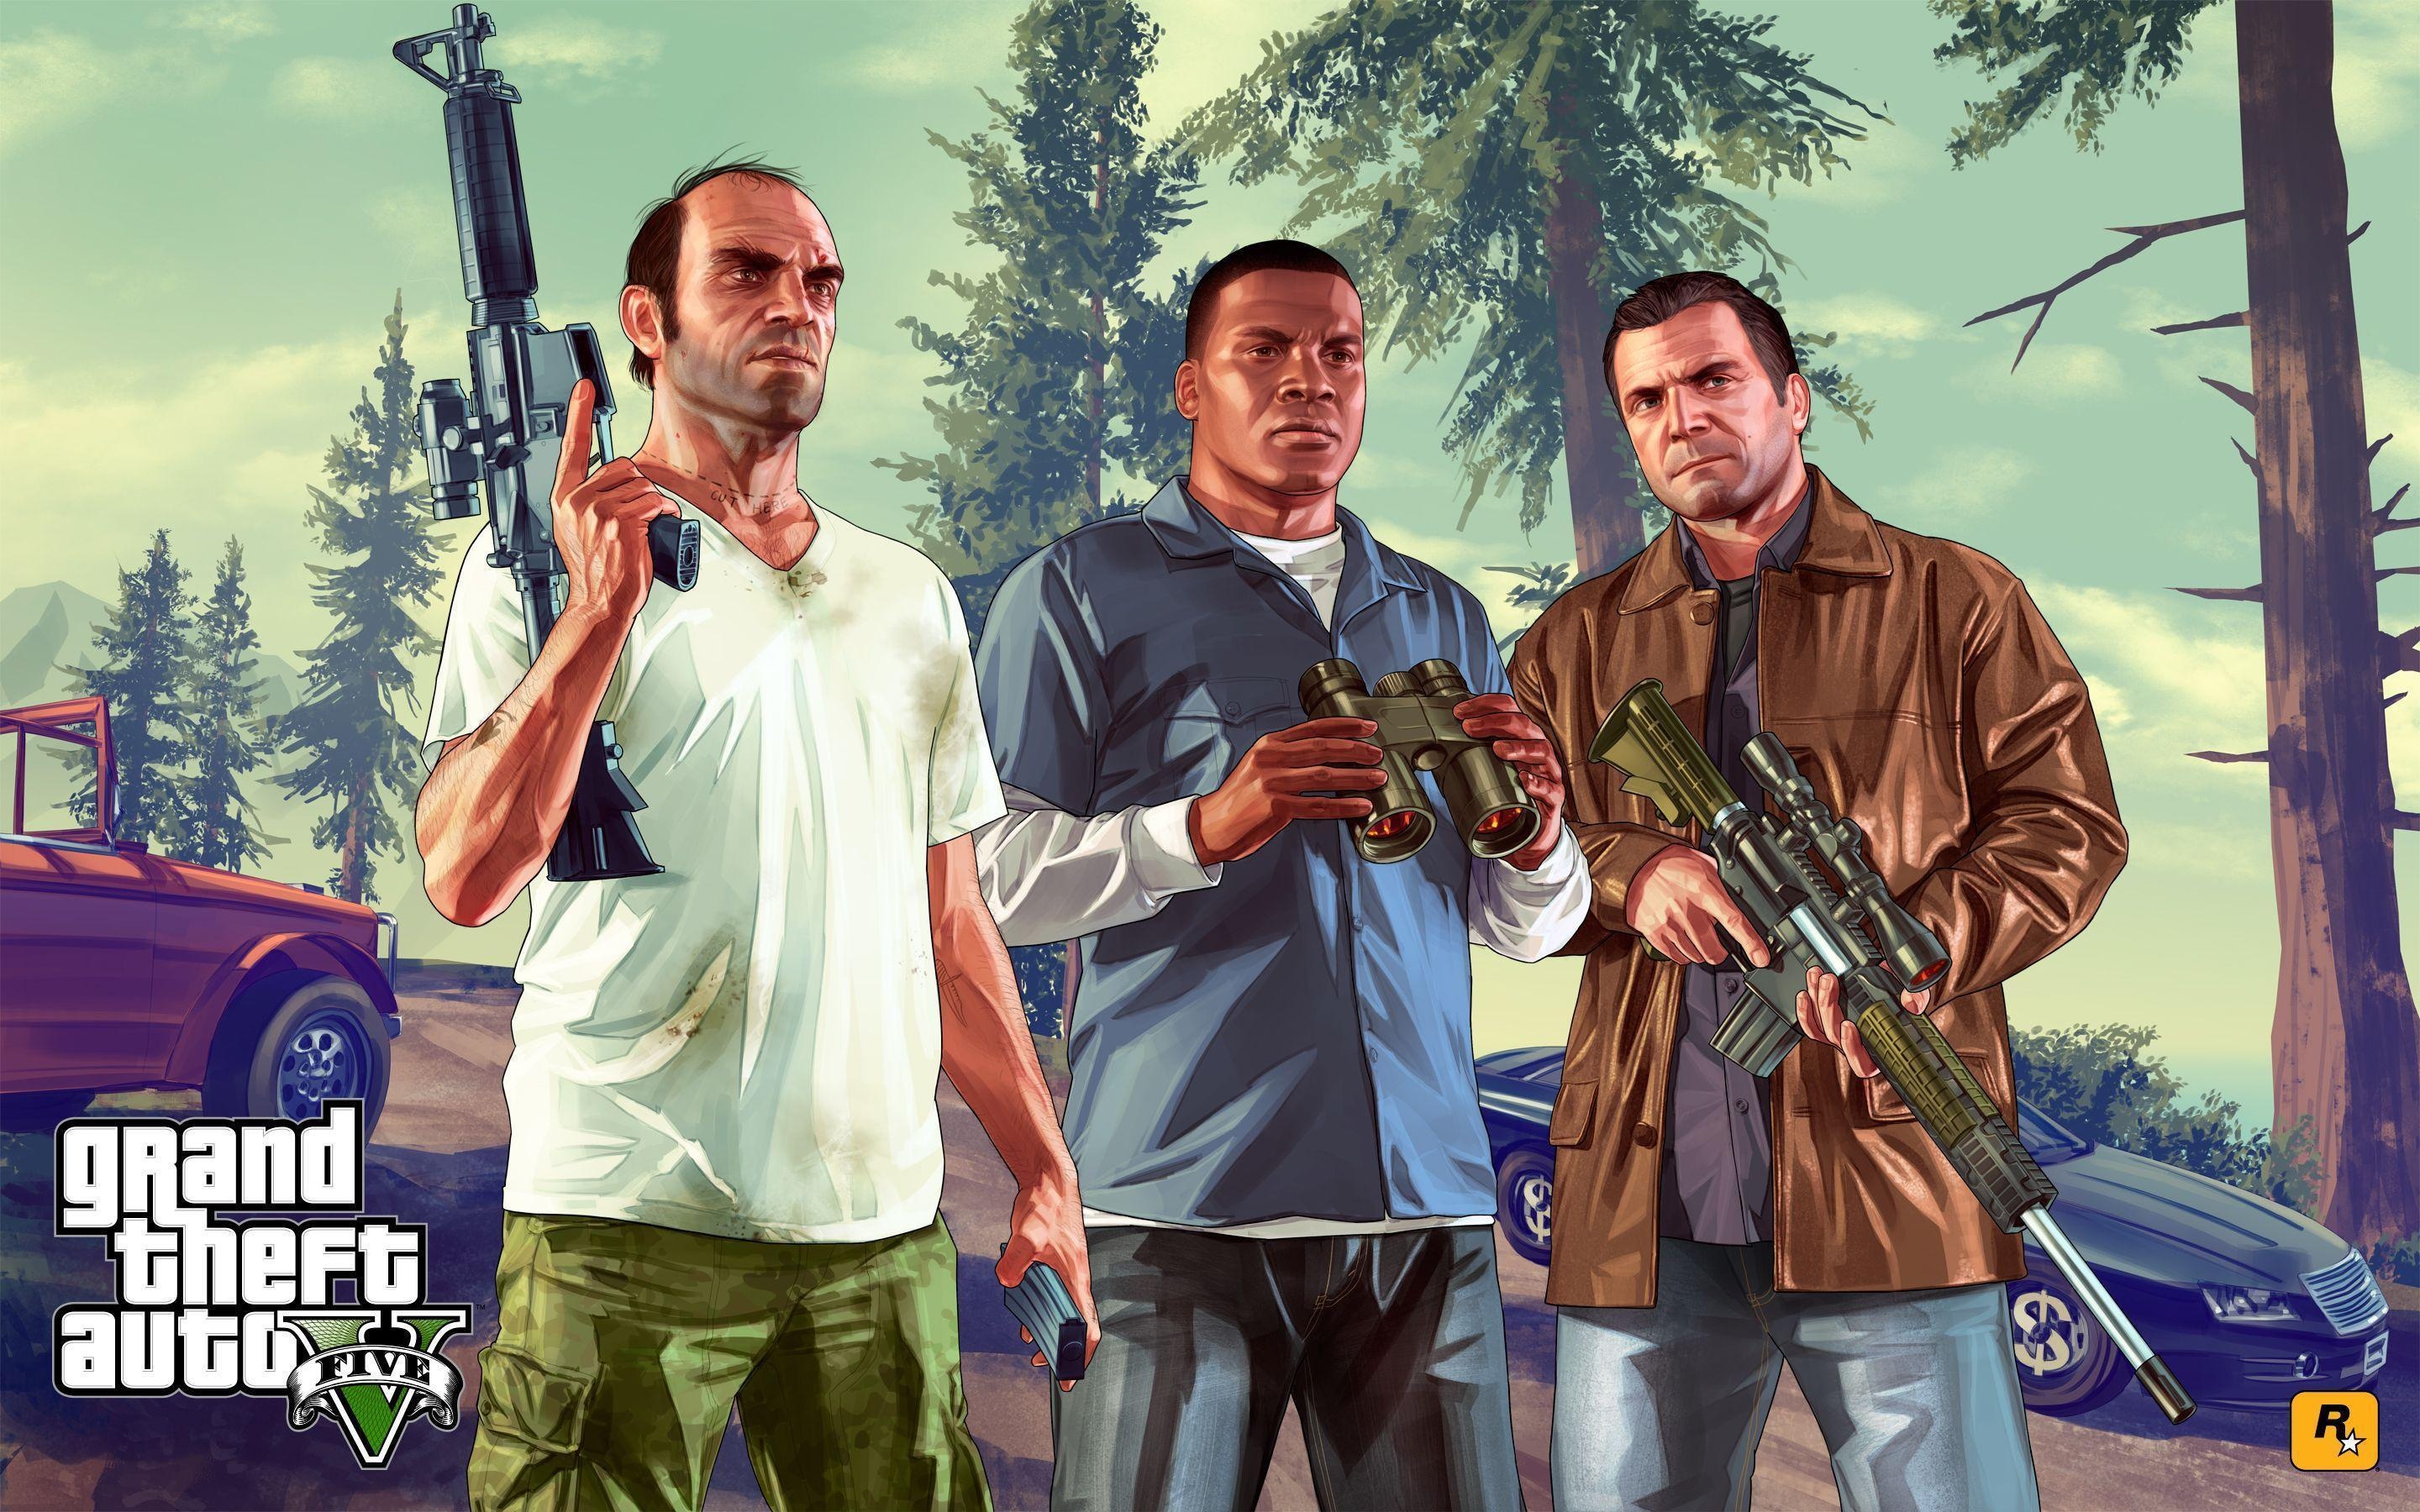 Grand Theft Auto, Best GTA 5 wallpapers, High-speed chases, Urban chaos, 2880x1800 HD Desktop